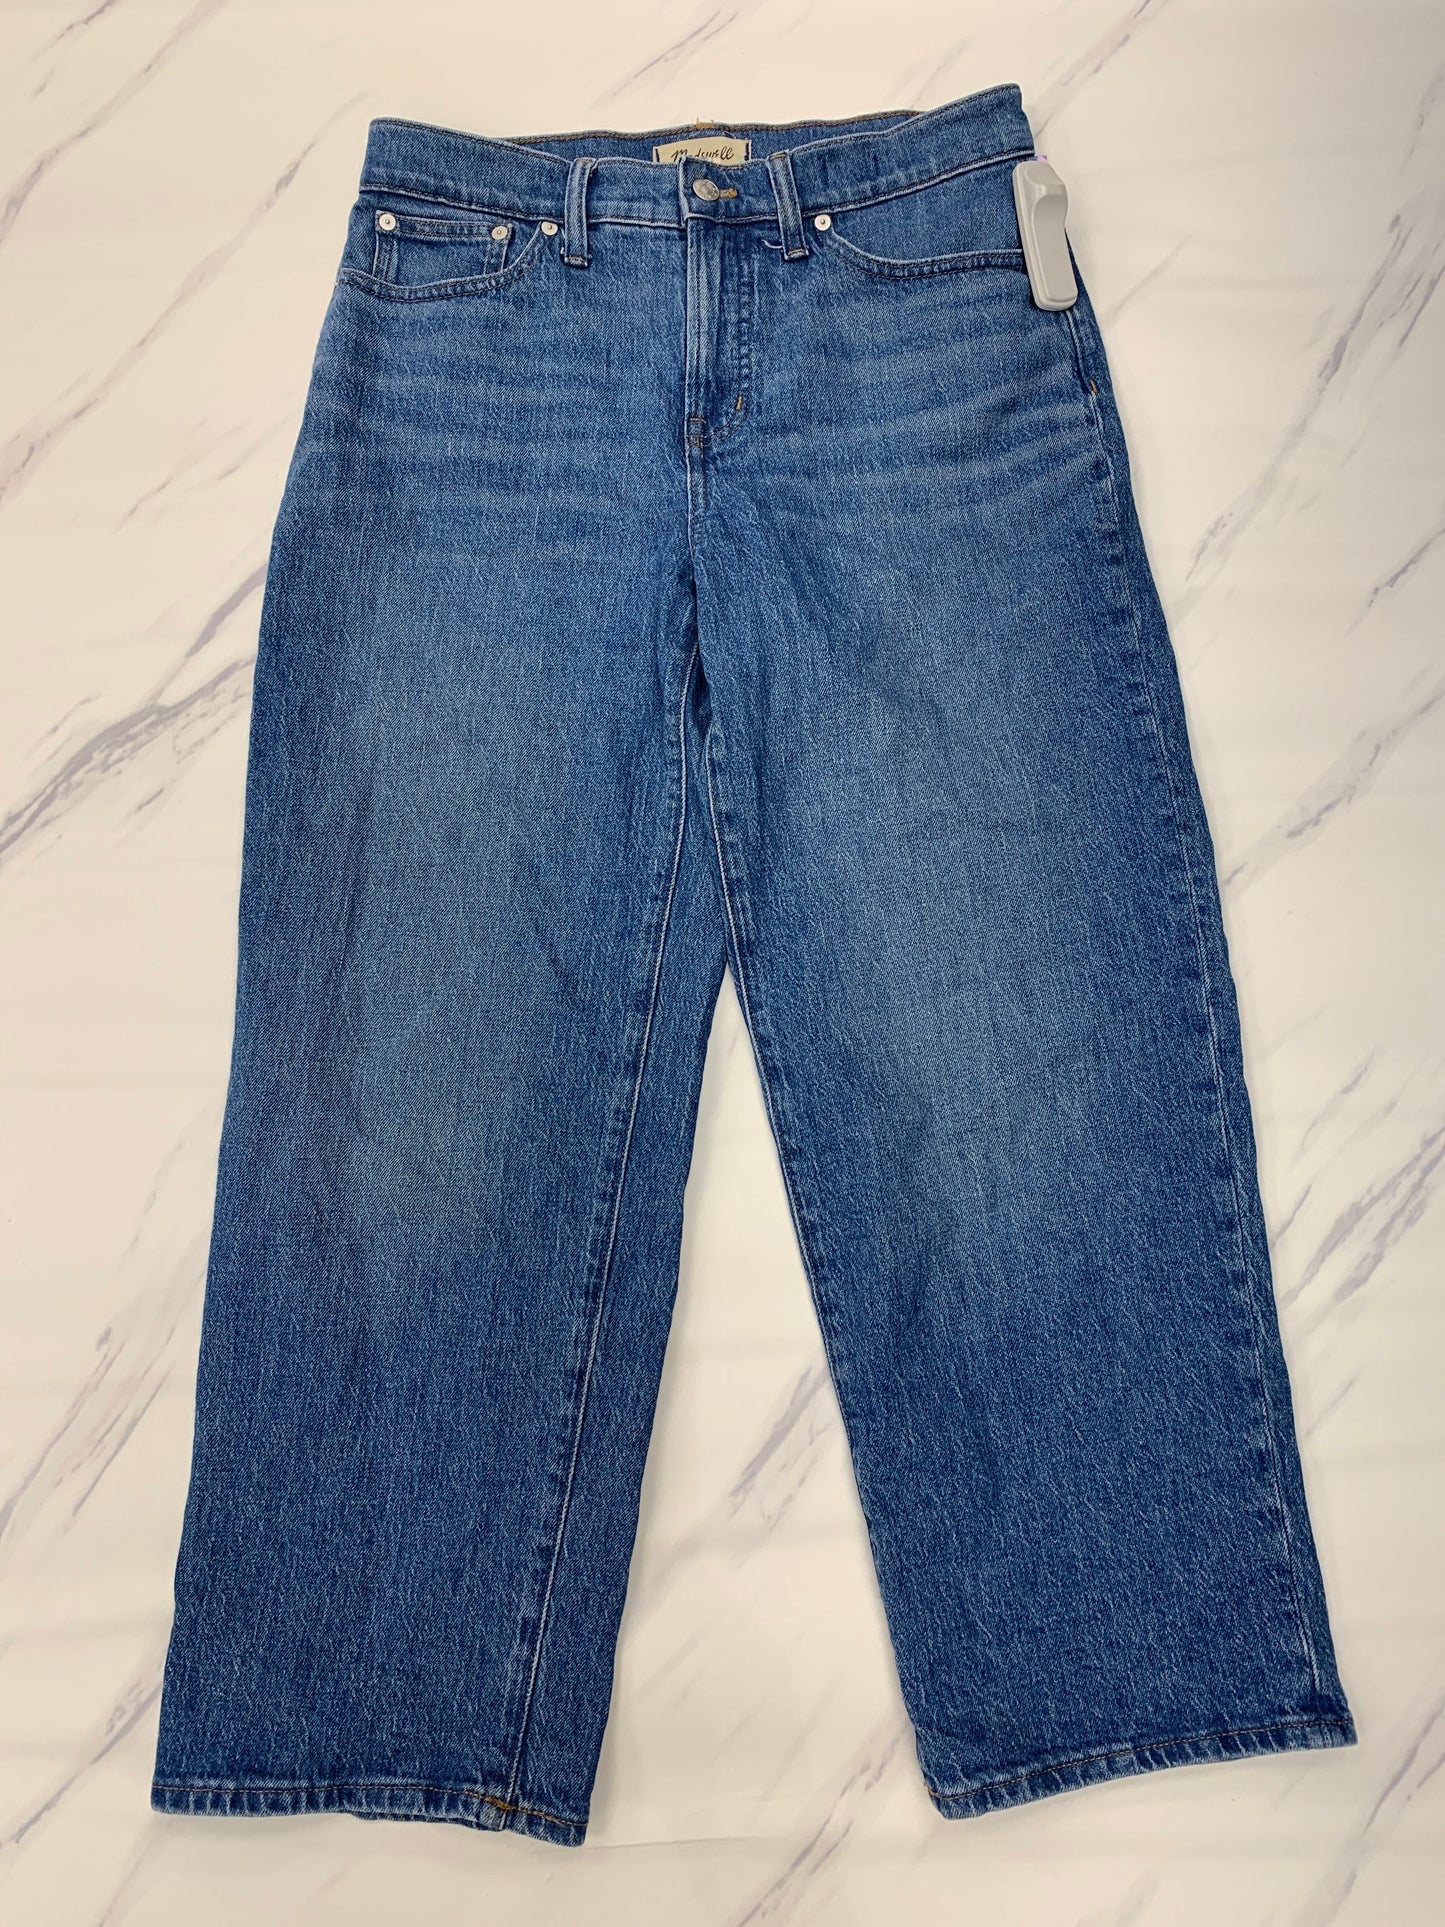 Jeans Wide Leg Madewell, Size 8petite